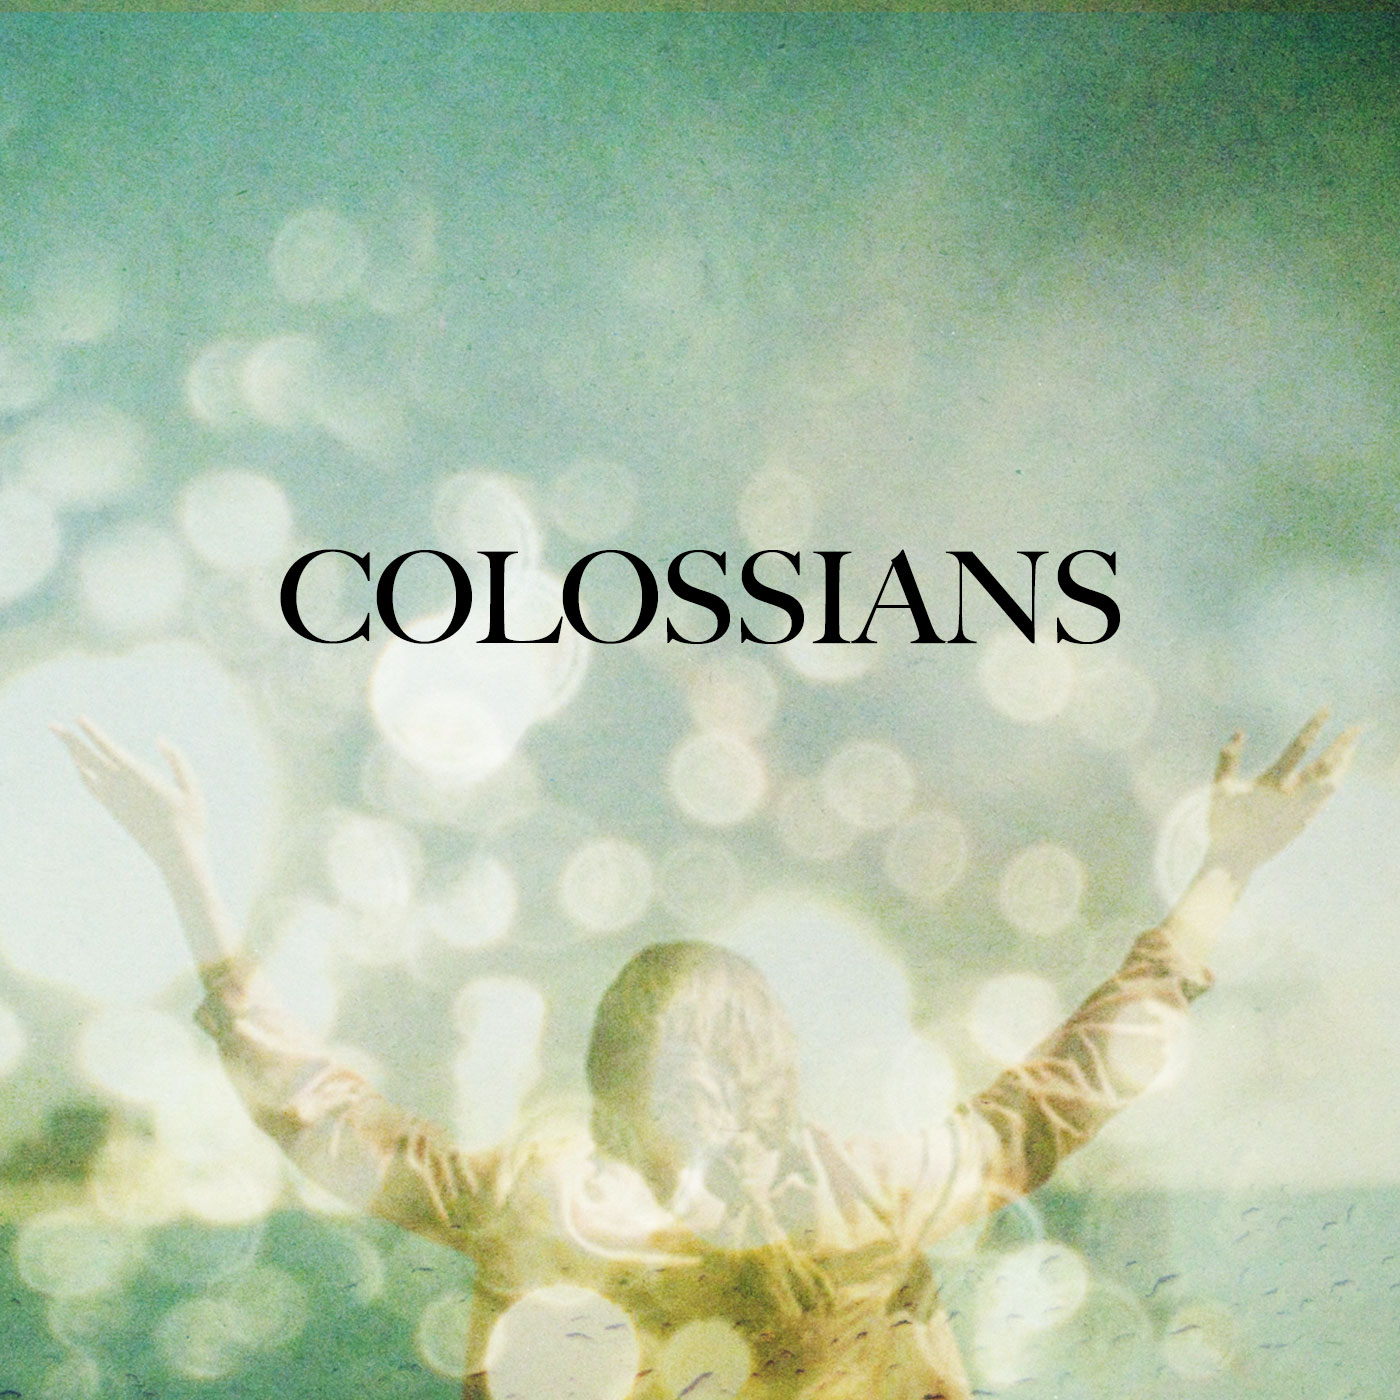 Chapter 4 - Letter to the Colossians